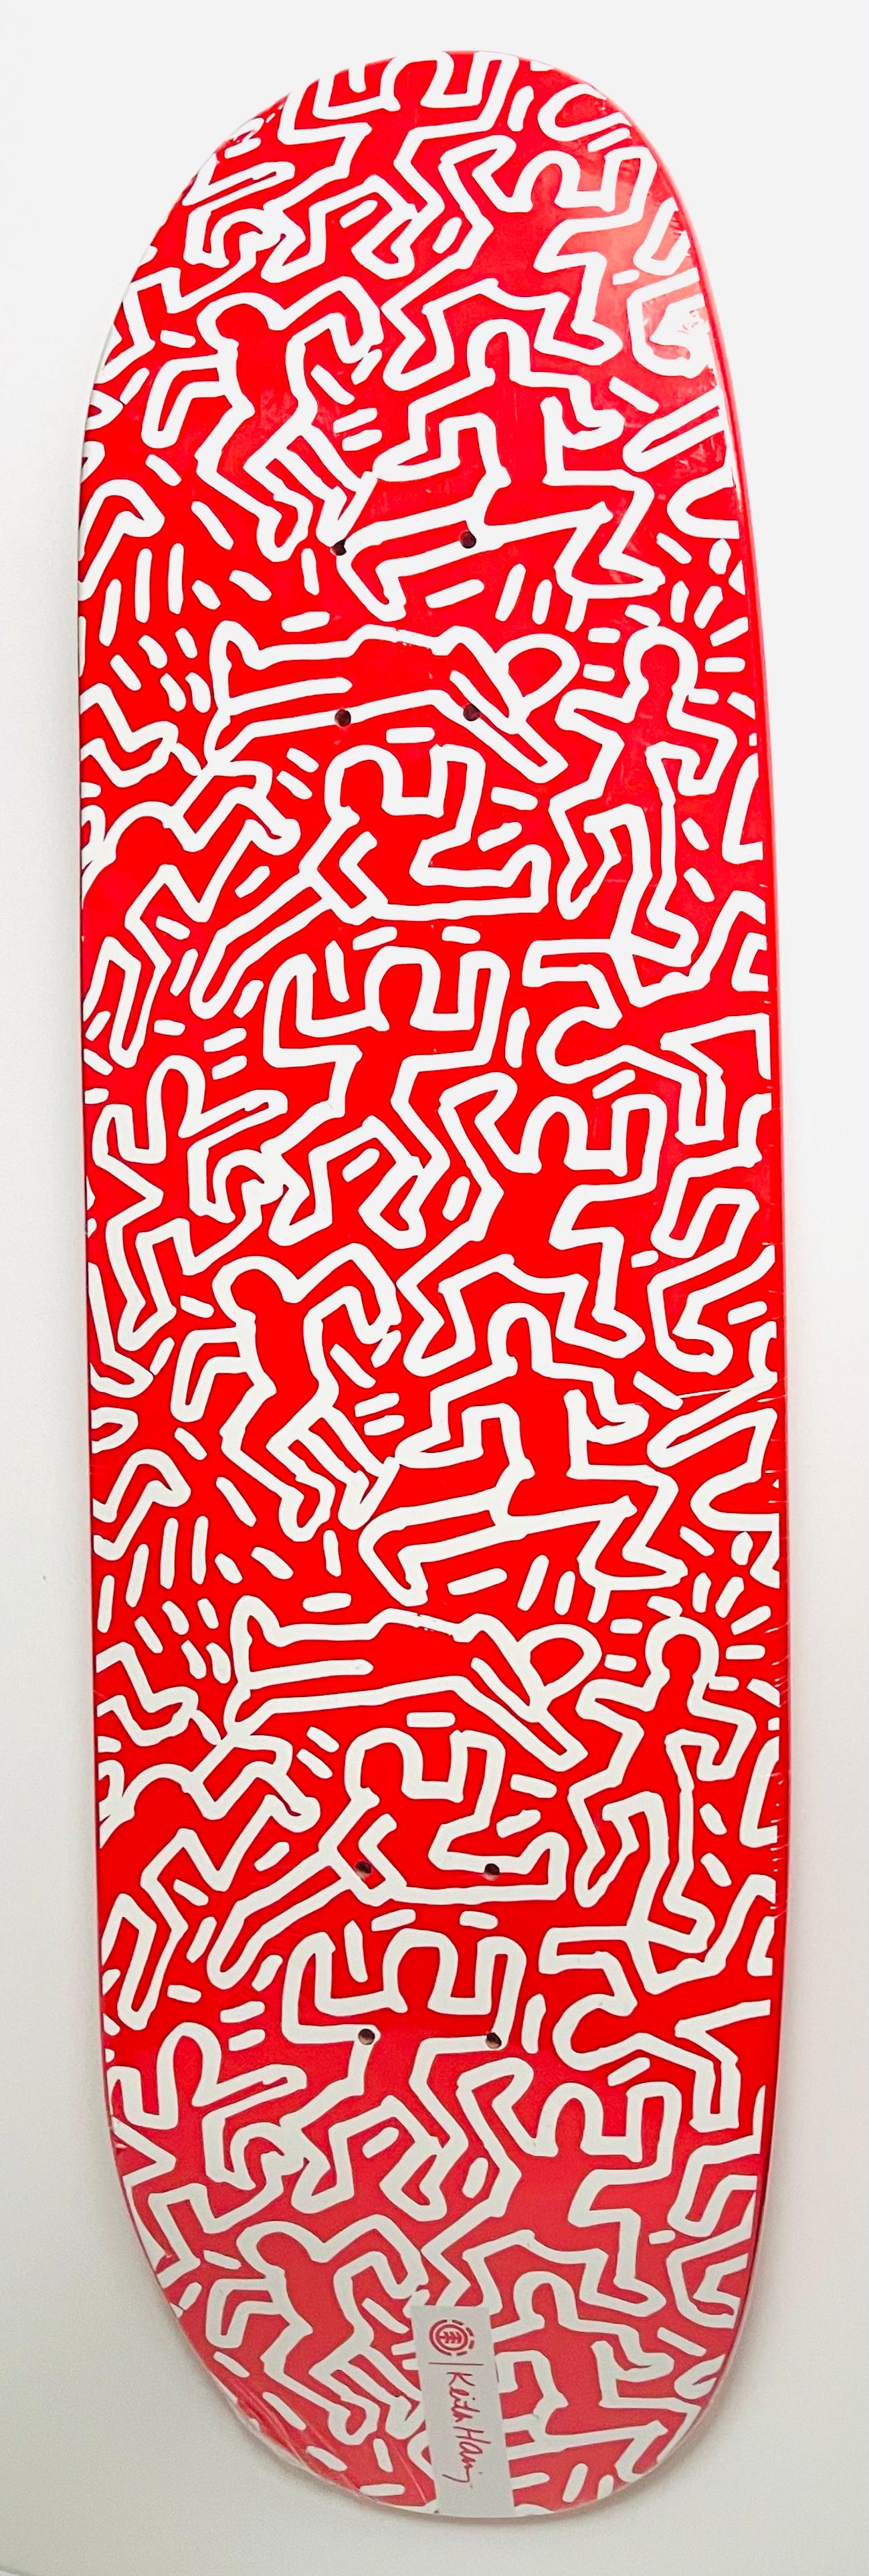 Keith Haring Skateboard Deck (Keith Haring three eyed face) - Pop Art Print by (after) Keith Haring